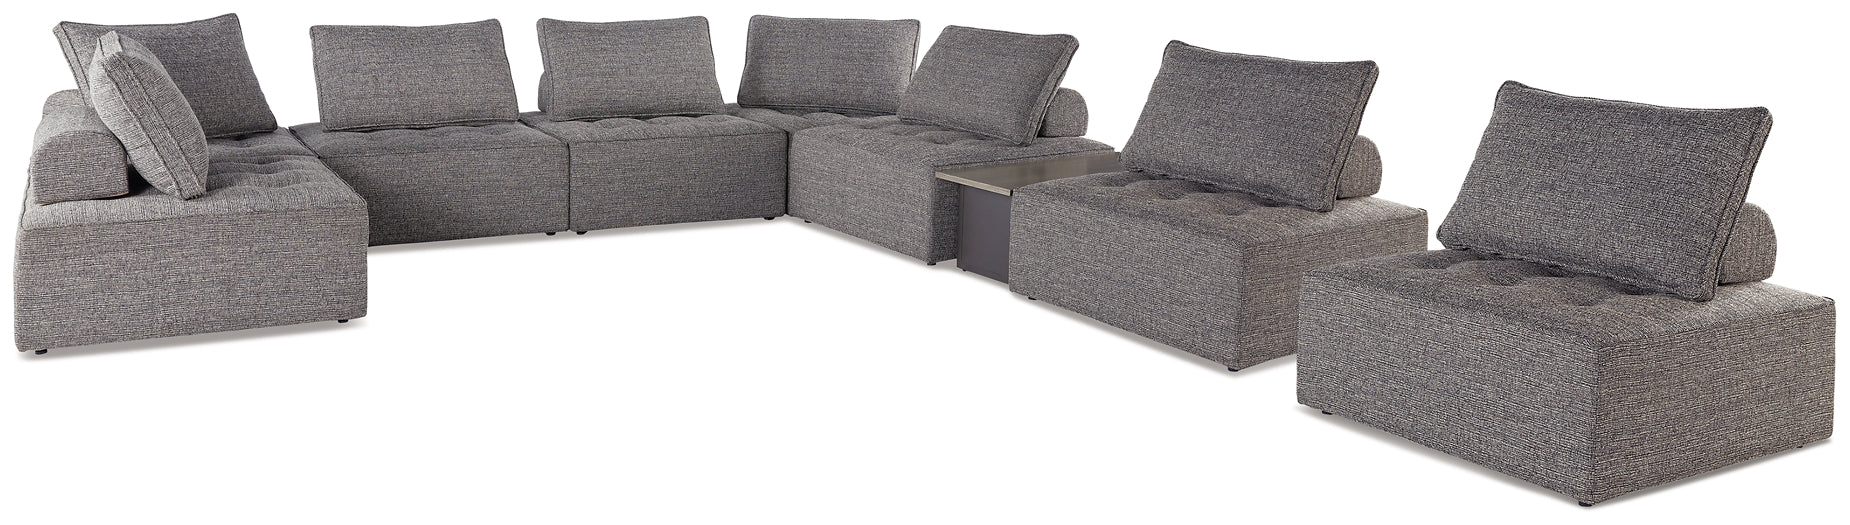 Ashley Express - Bree Zee 8-Piece Outdoor Sectional with Lounge Chair